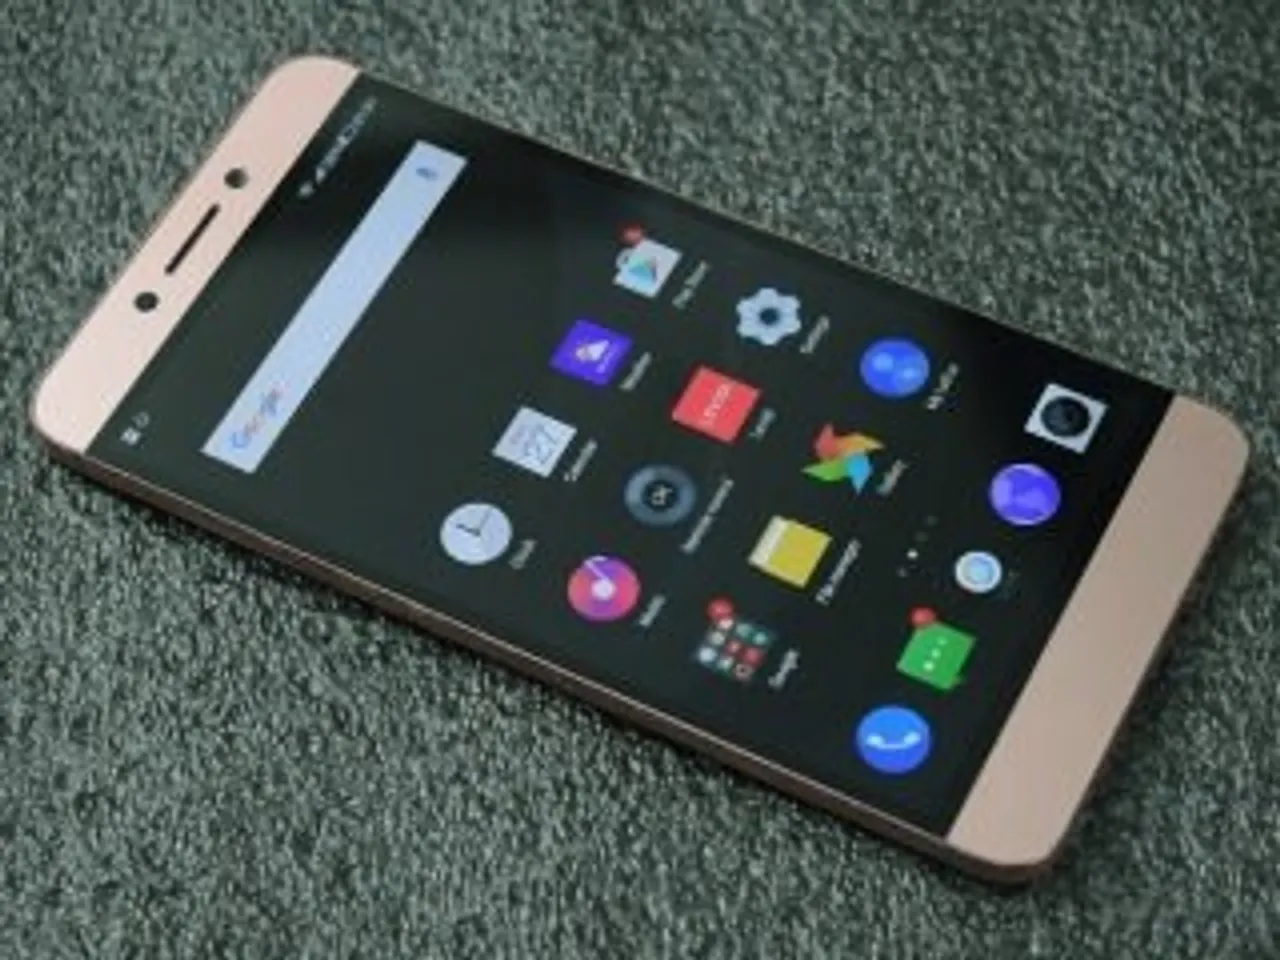 LeEco’s Le2 at discounted rate in Snapdeal’s Republic Day Sale from Jan 21–23